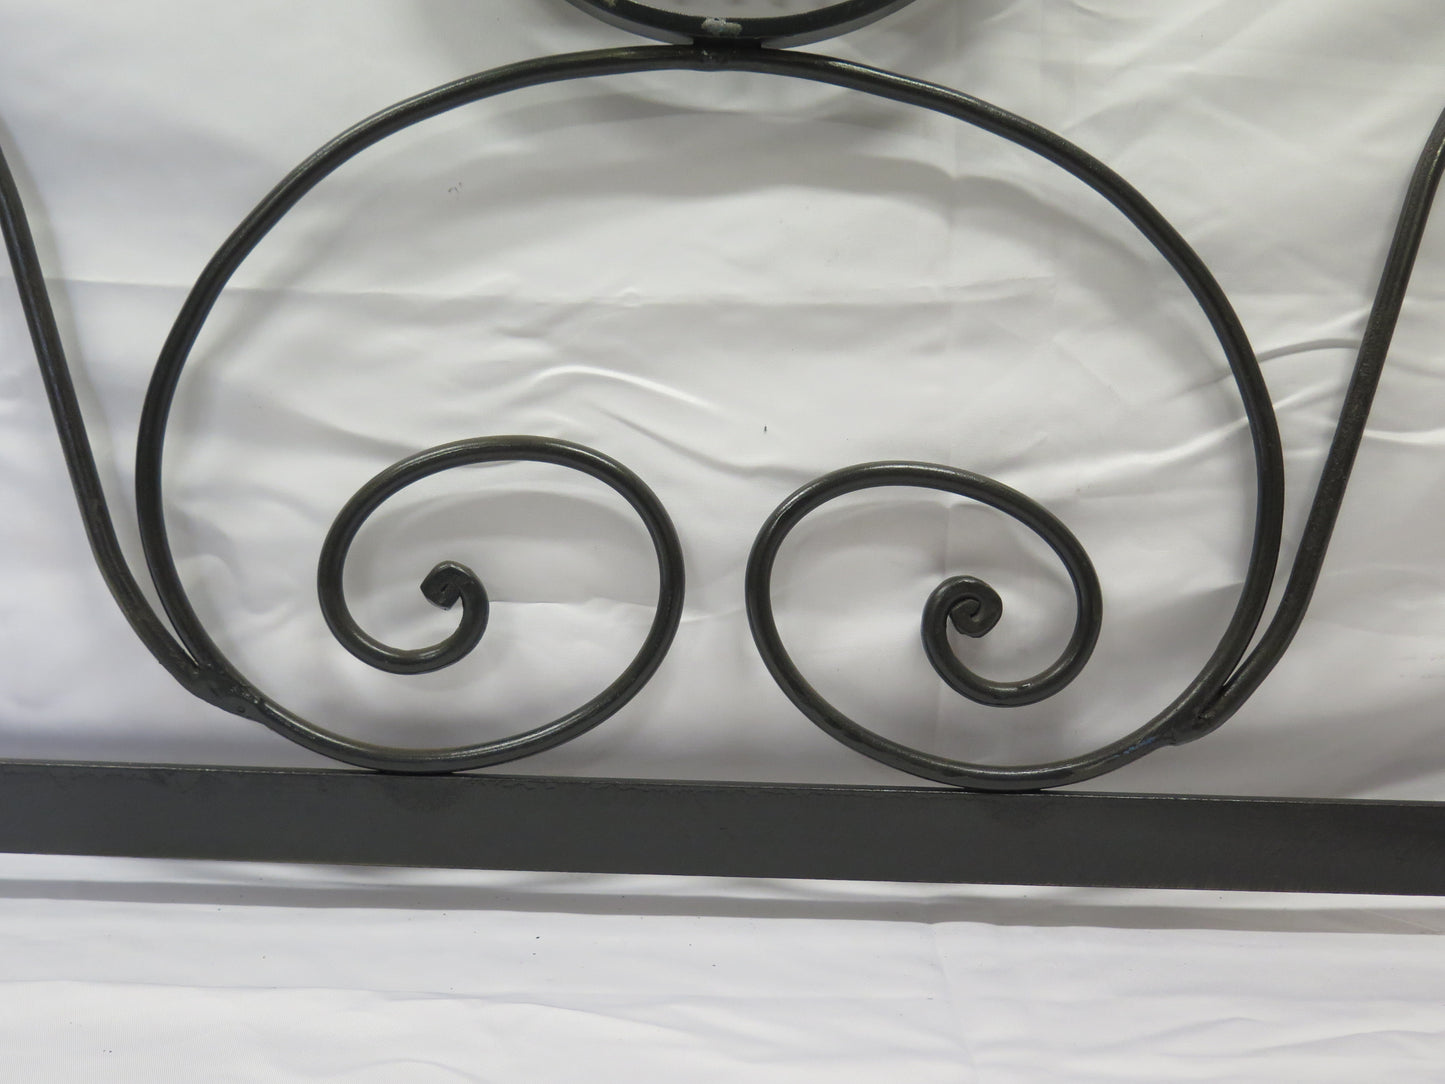 HEADBOARD IN HAND FORGED WROUGHT IRON VINTAGE DOUBLE BED 48 CH